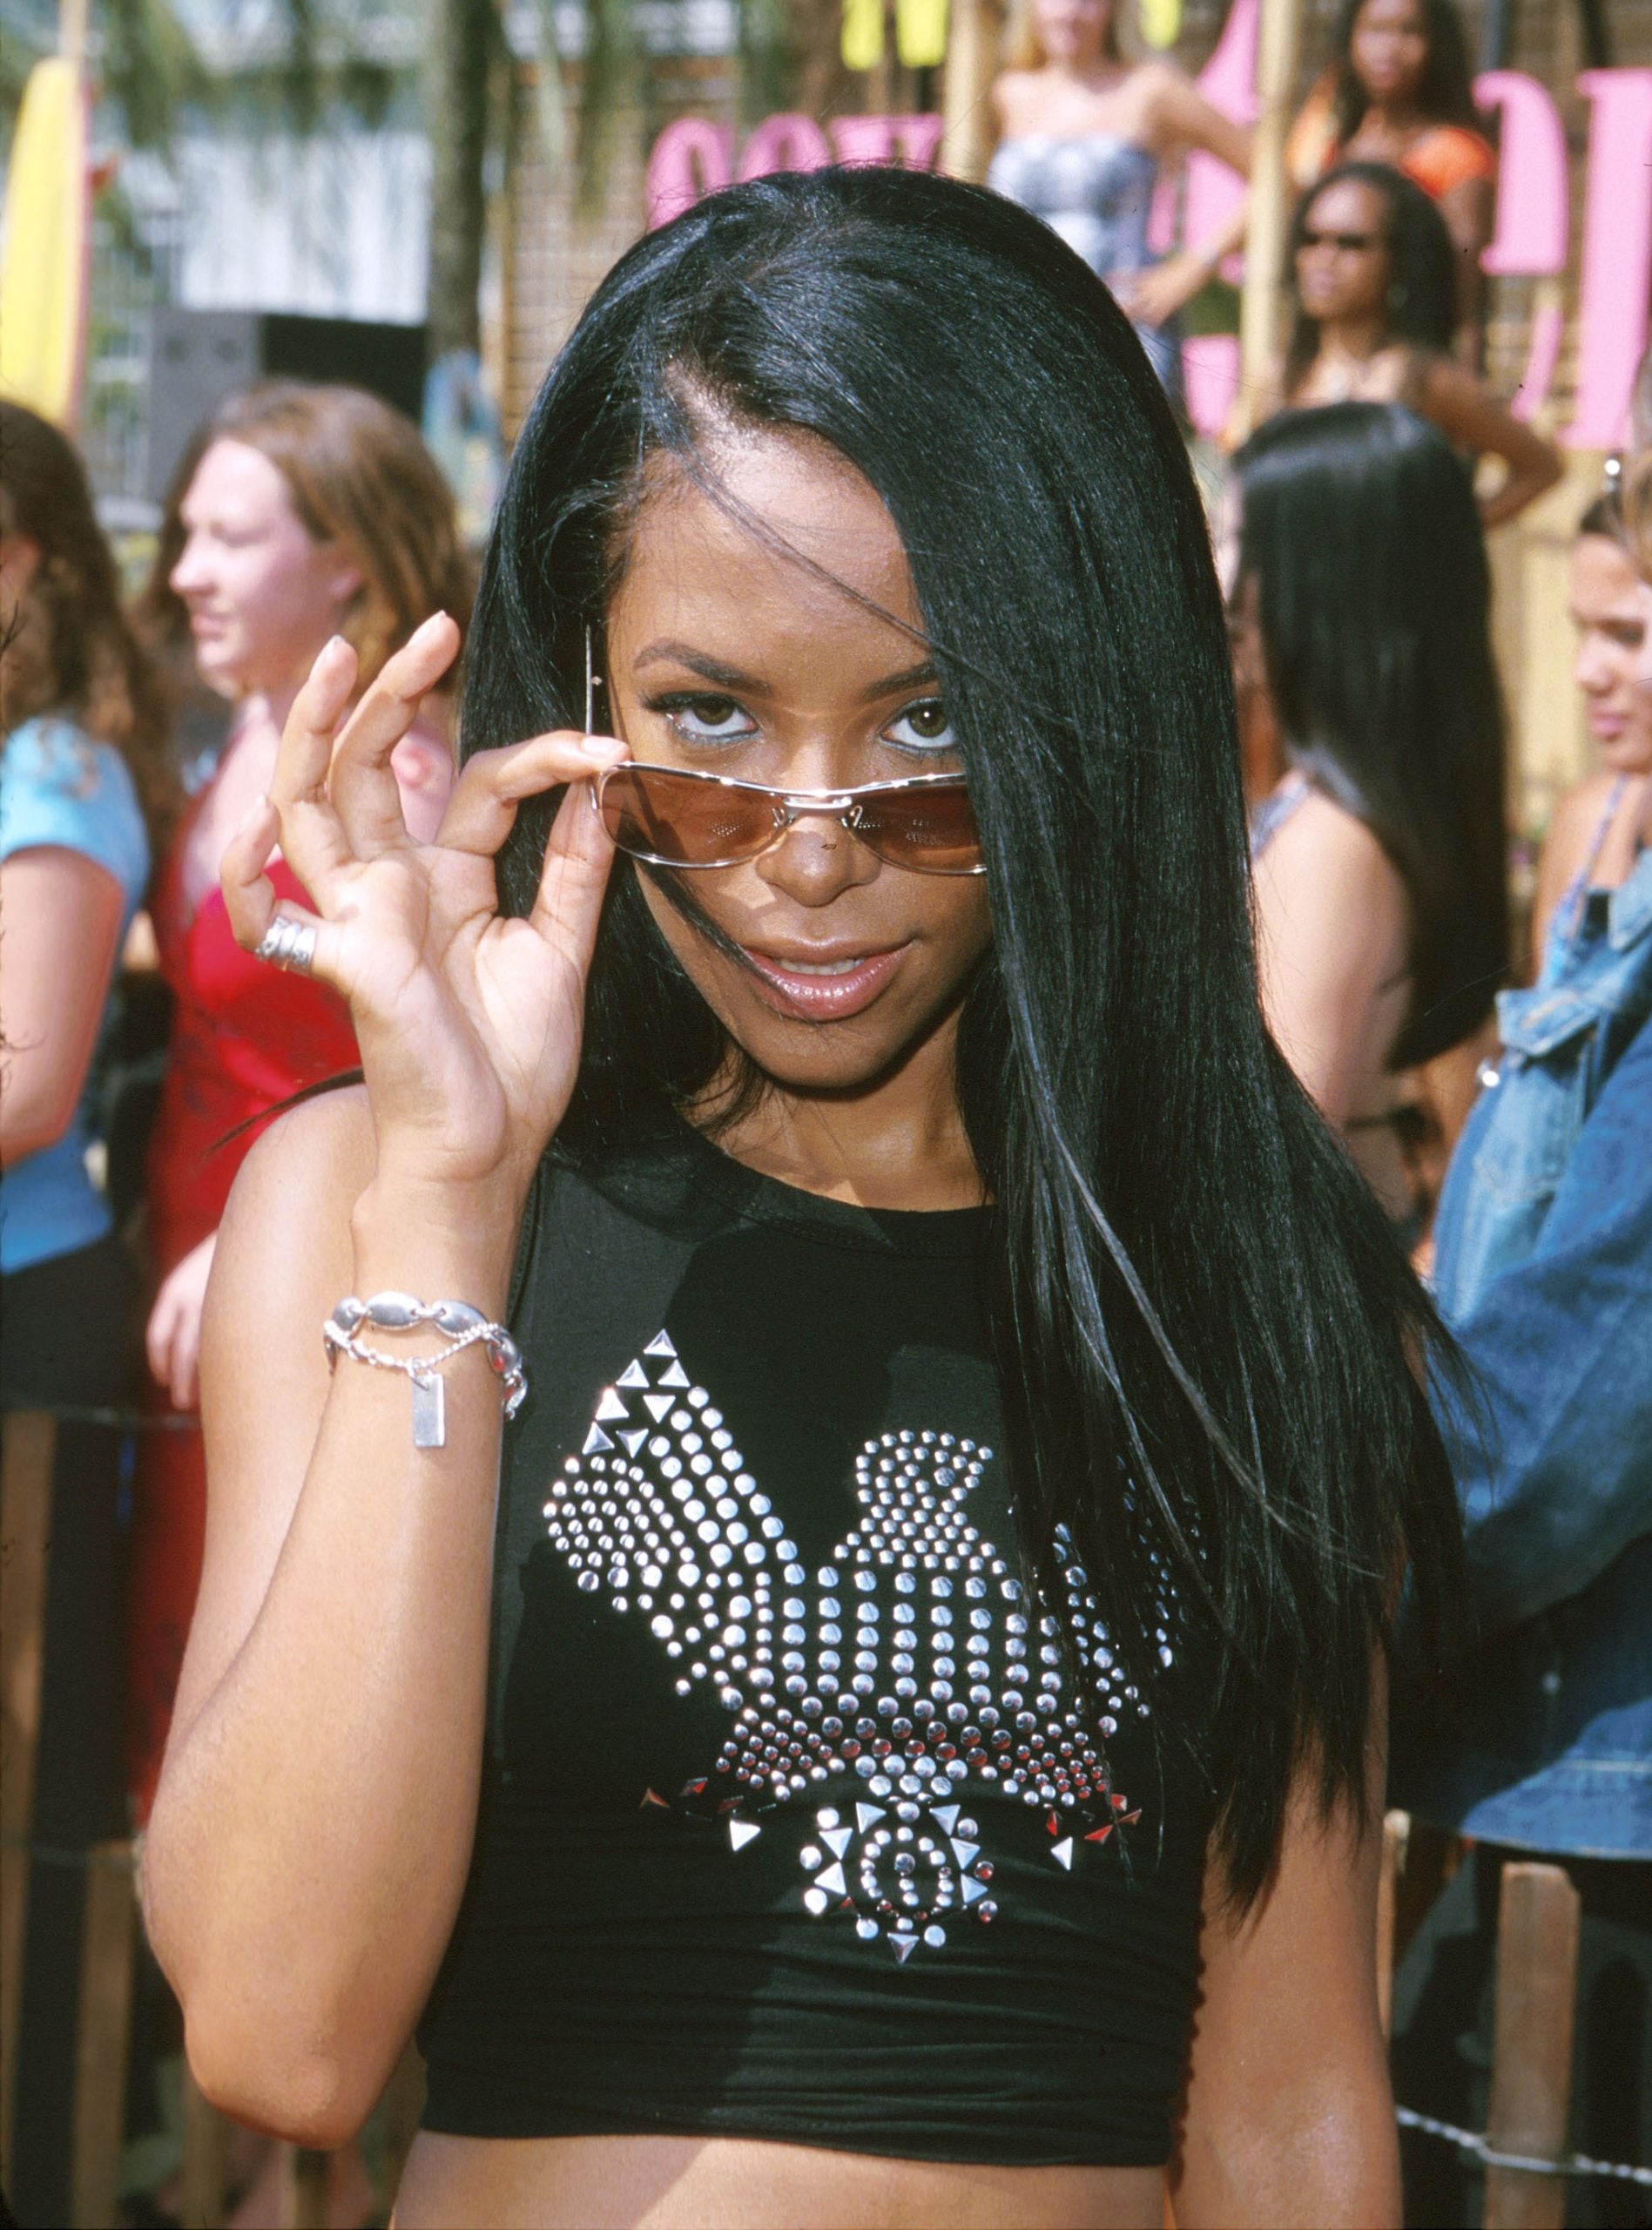 12 Aaliyah Songs We Can't Wait To Hear On Streaming Services